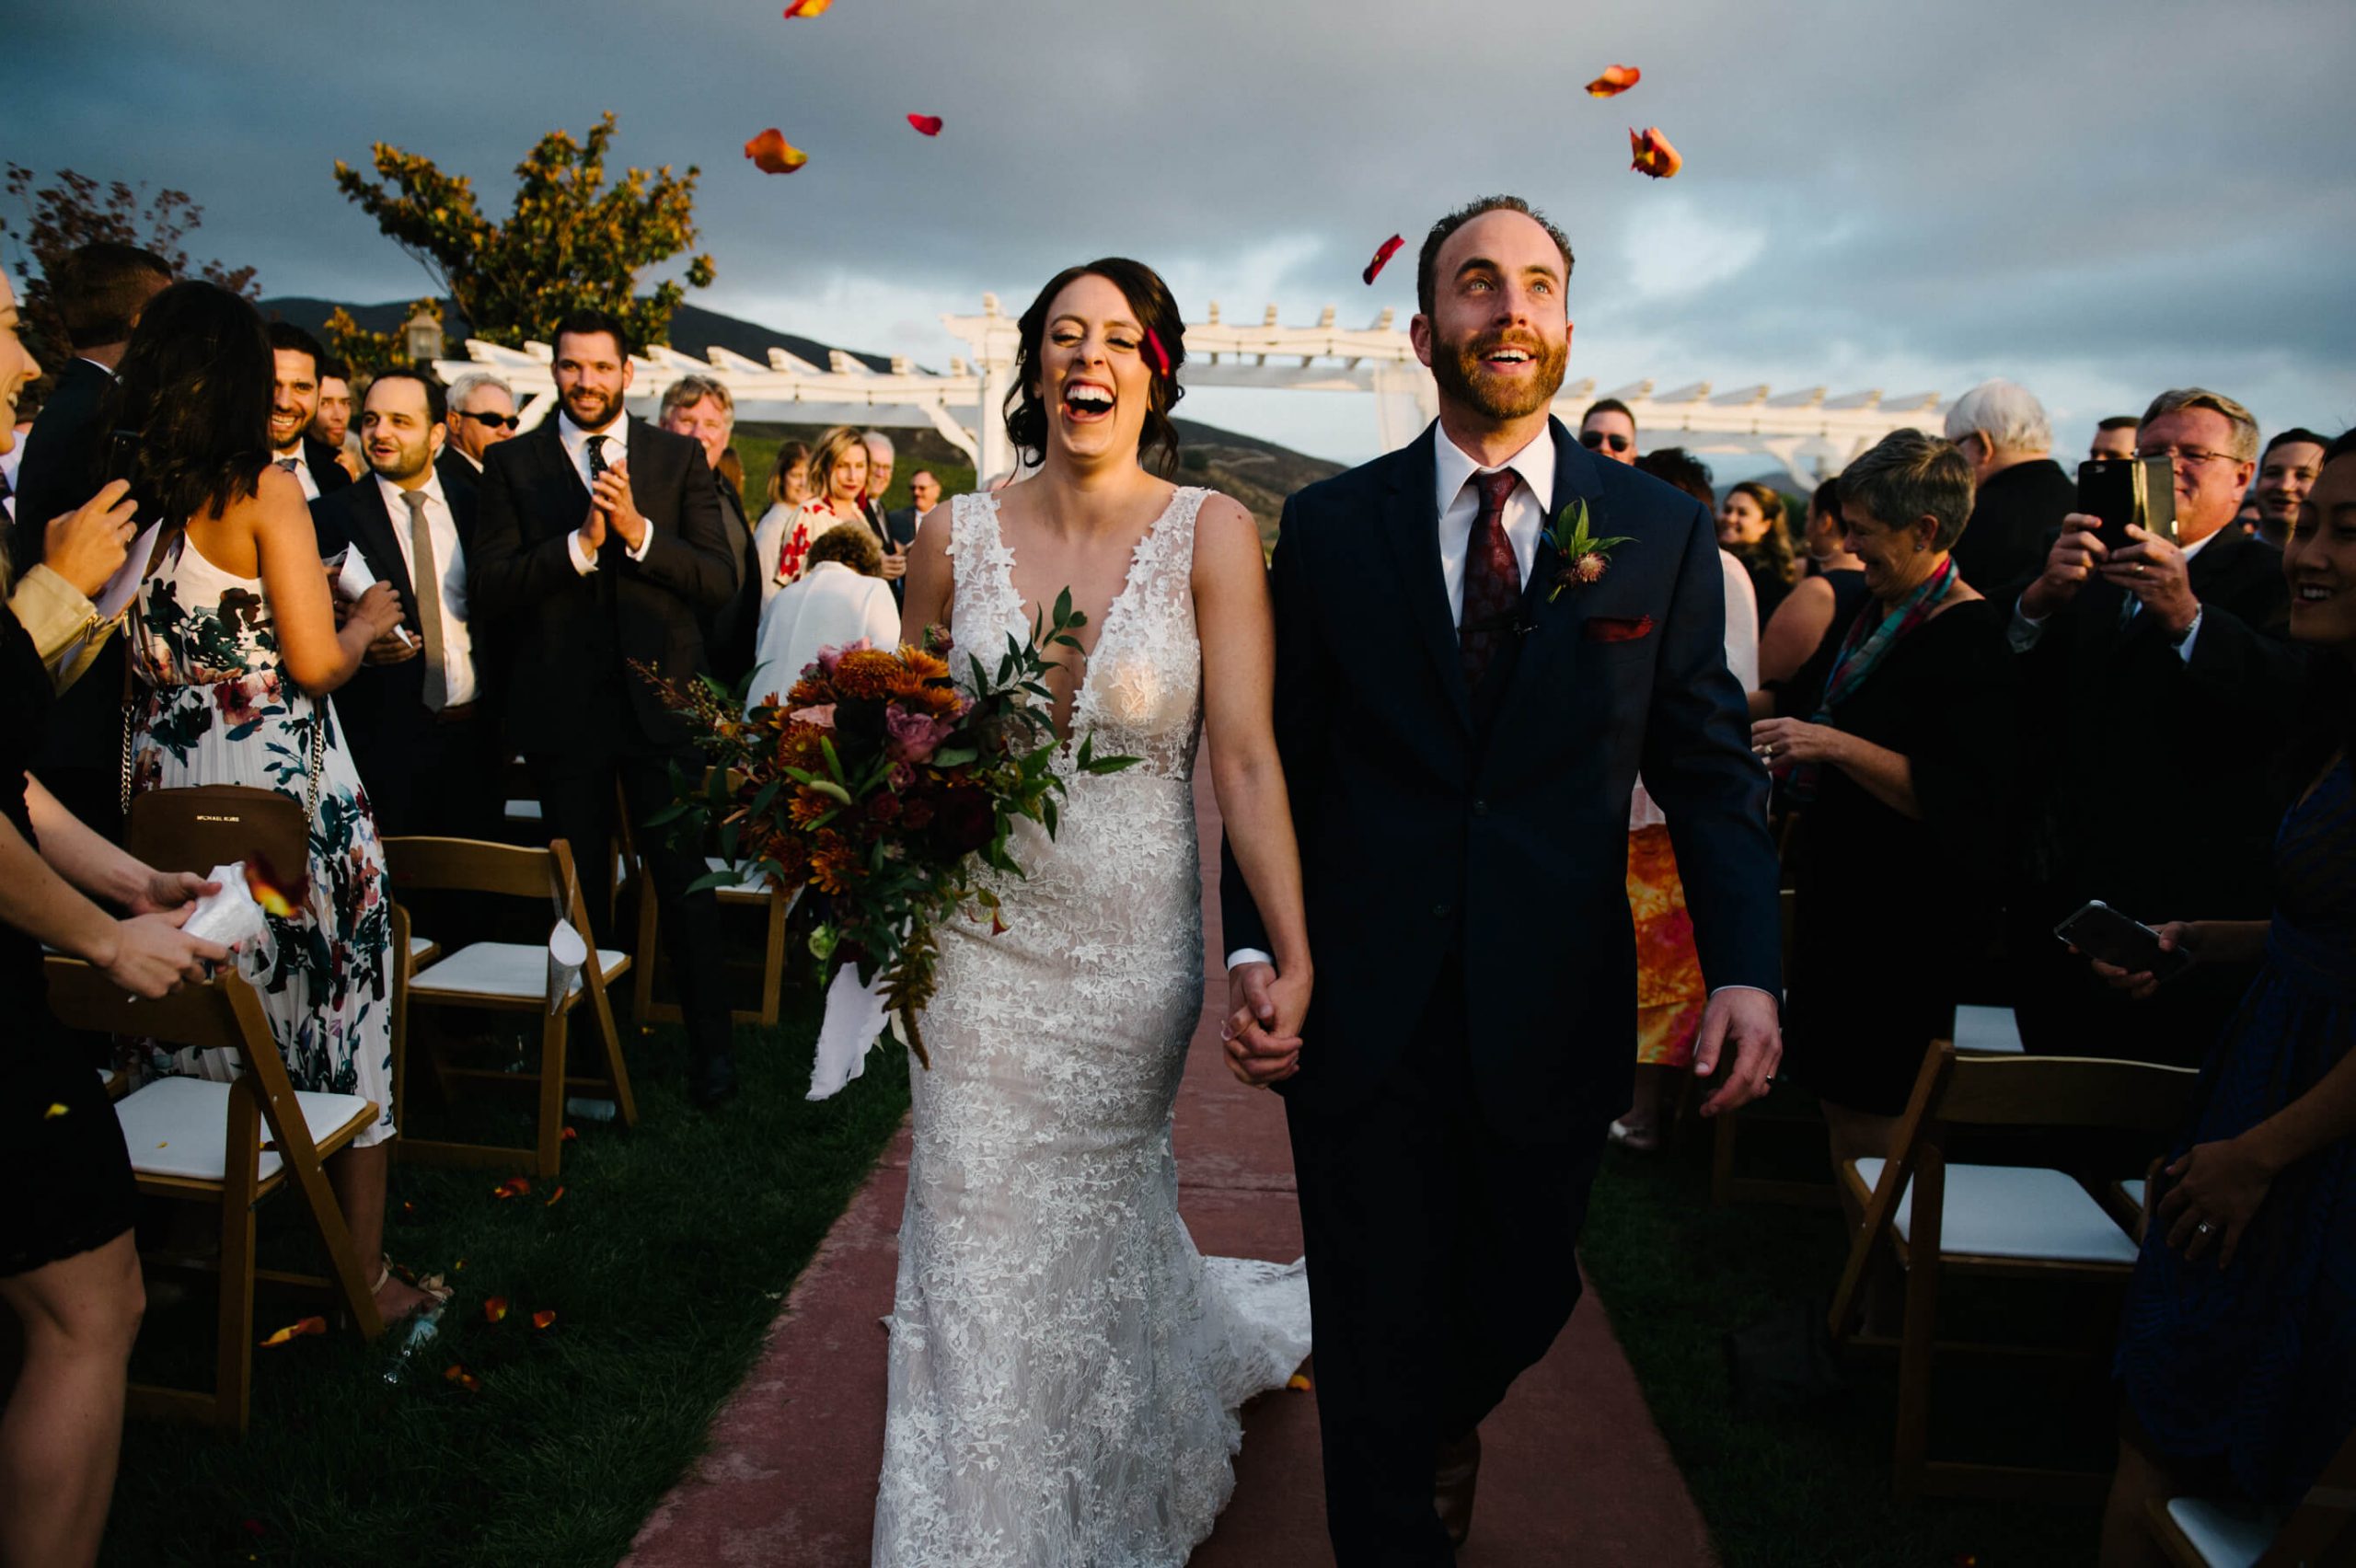 guests throw rose petals in air as bride and groom process down aisle leoness cellars